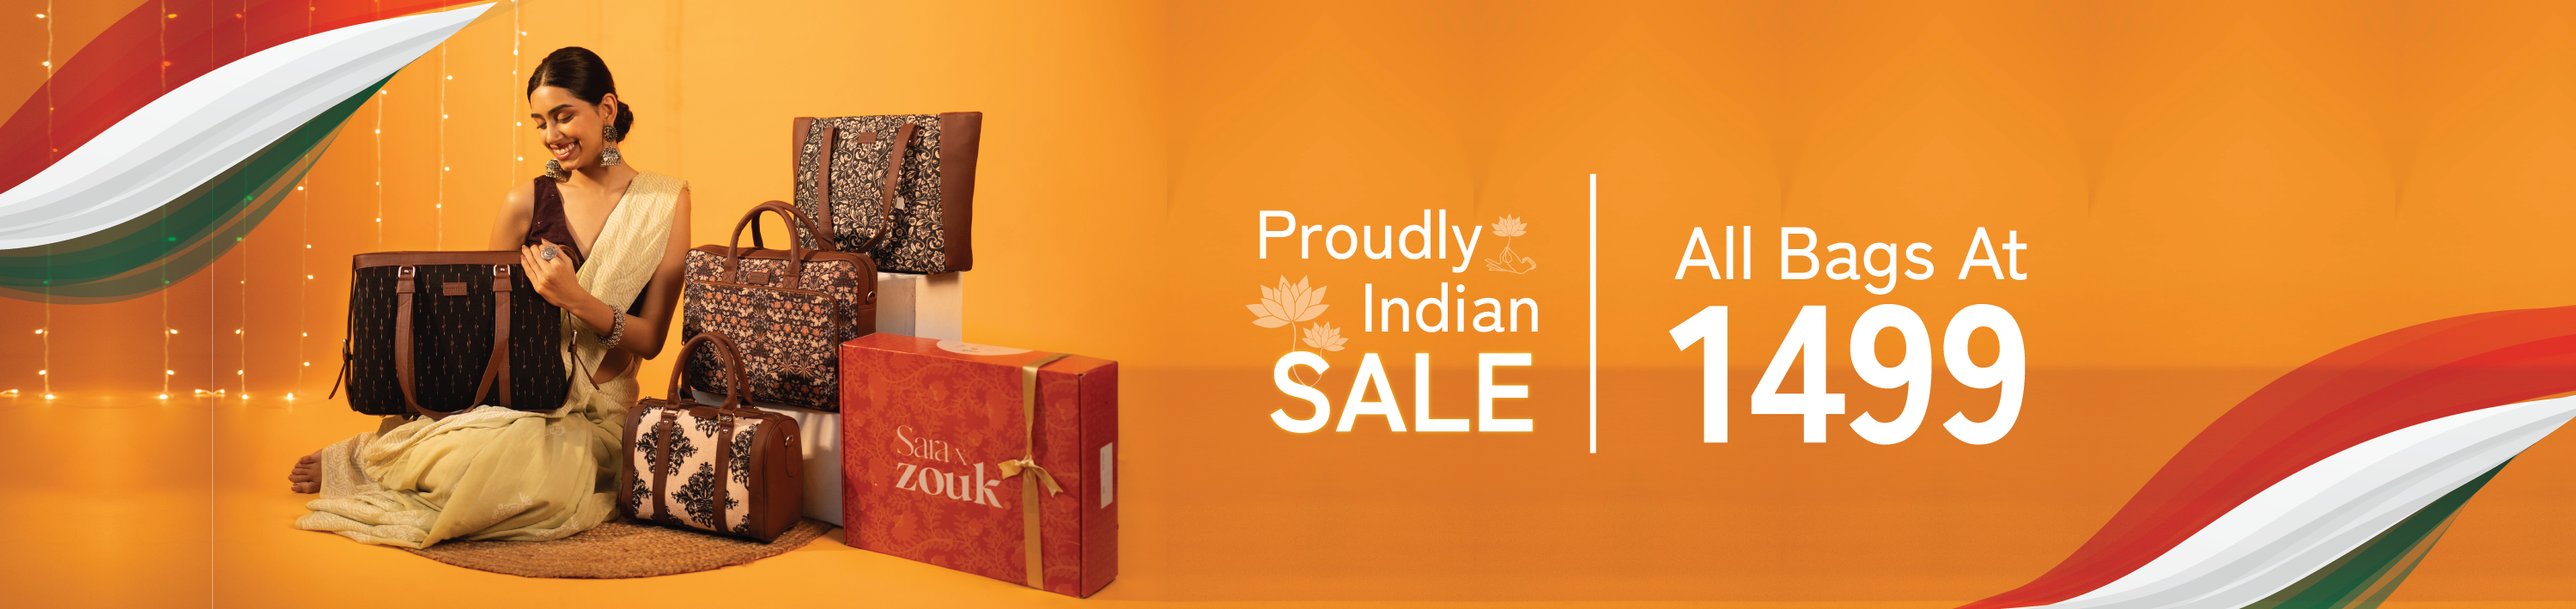 Proudly Indian Sale